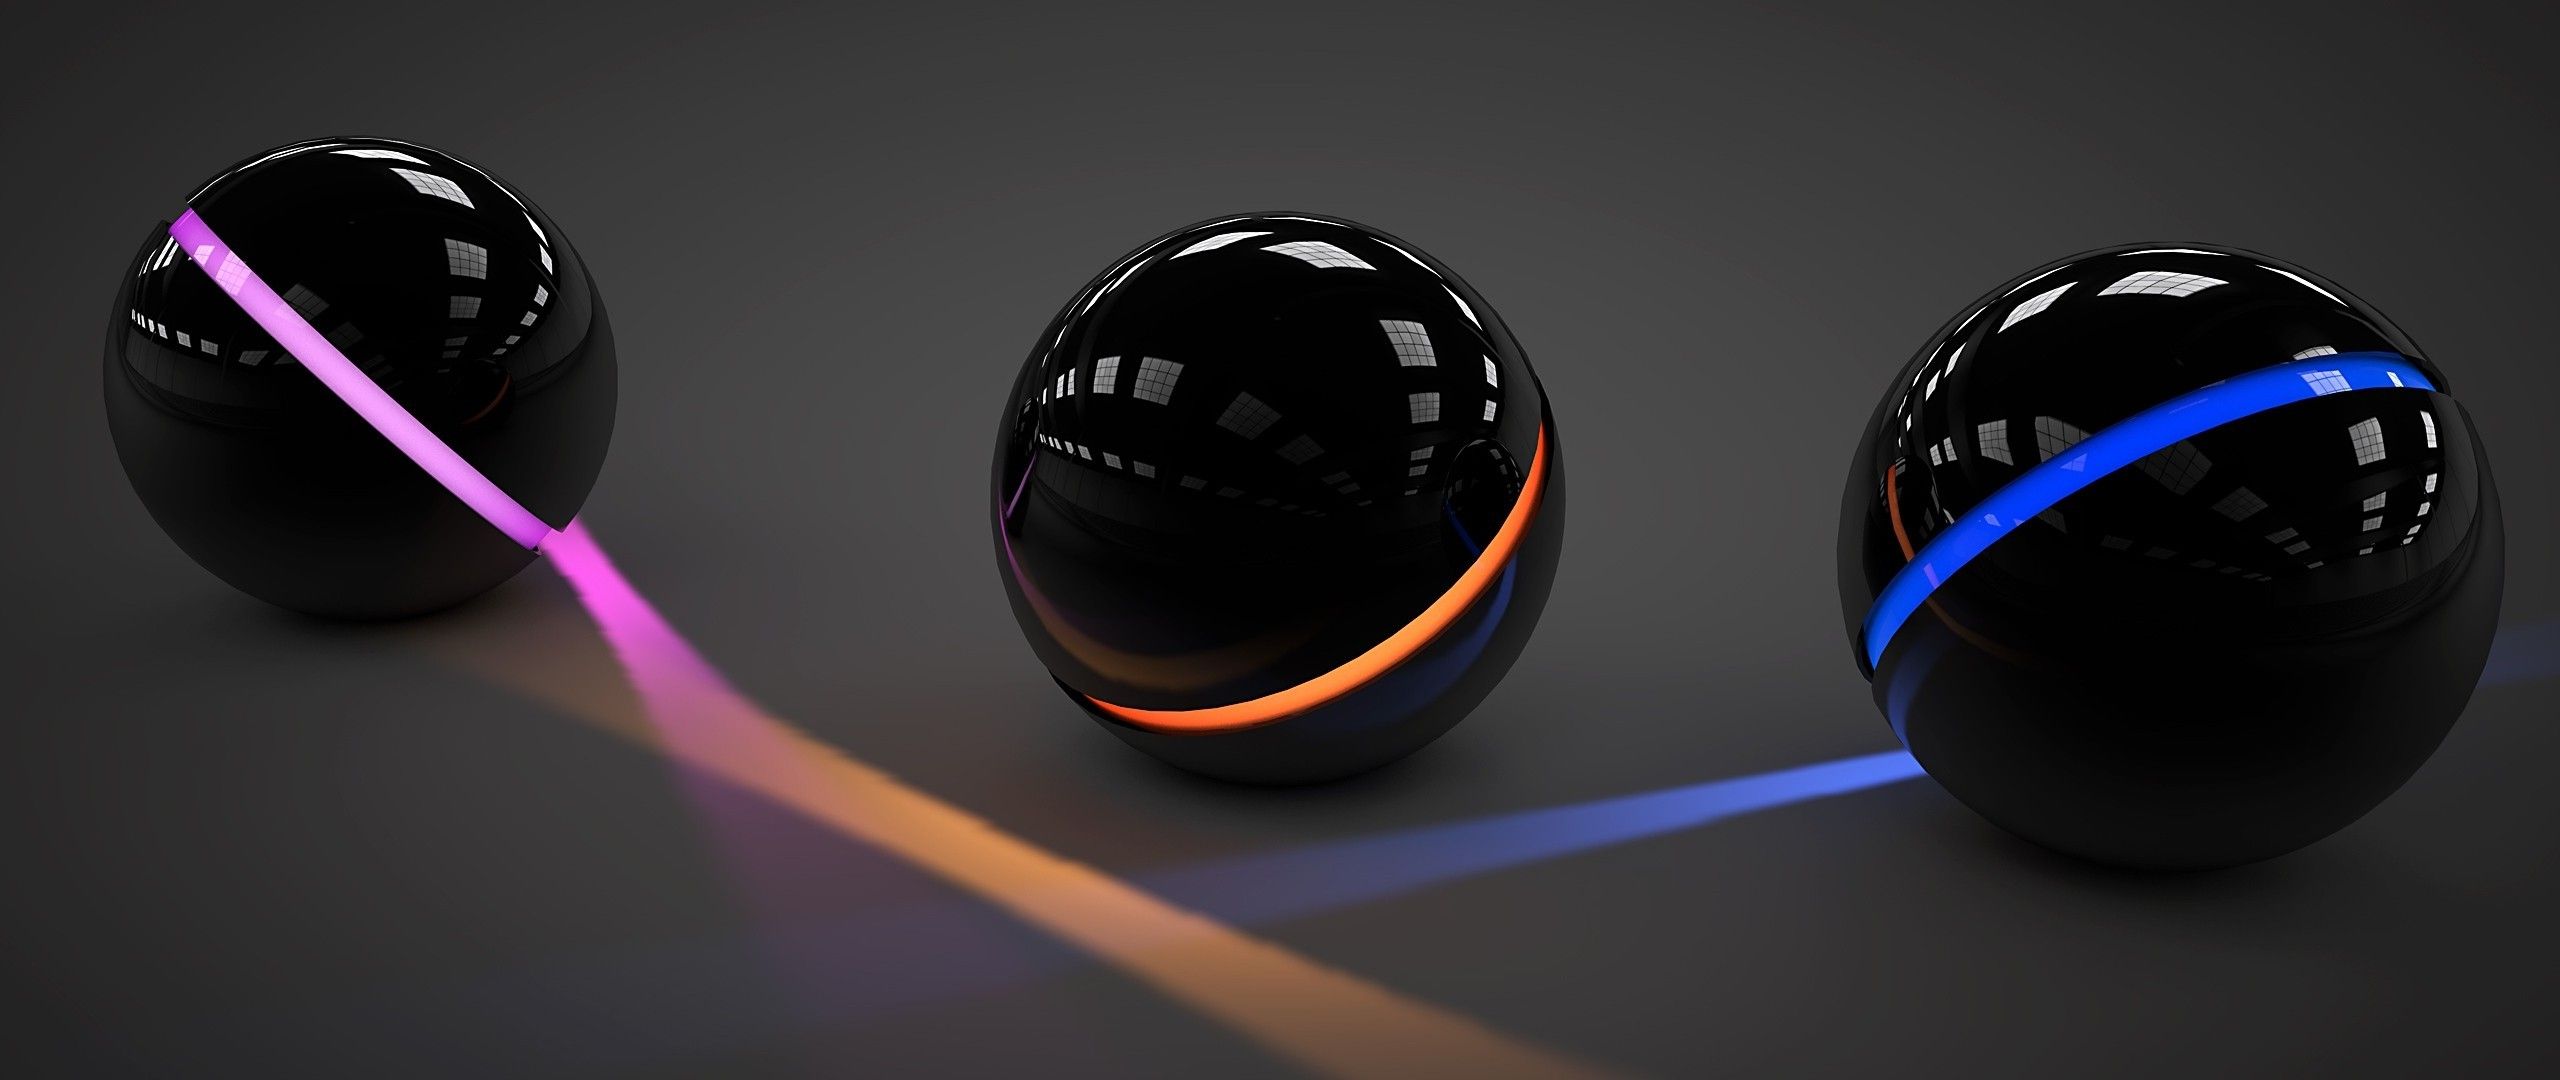 Abstract Ball Wallpapers